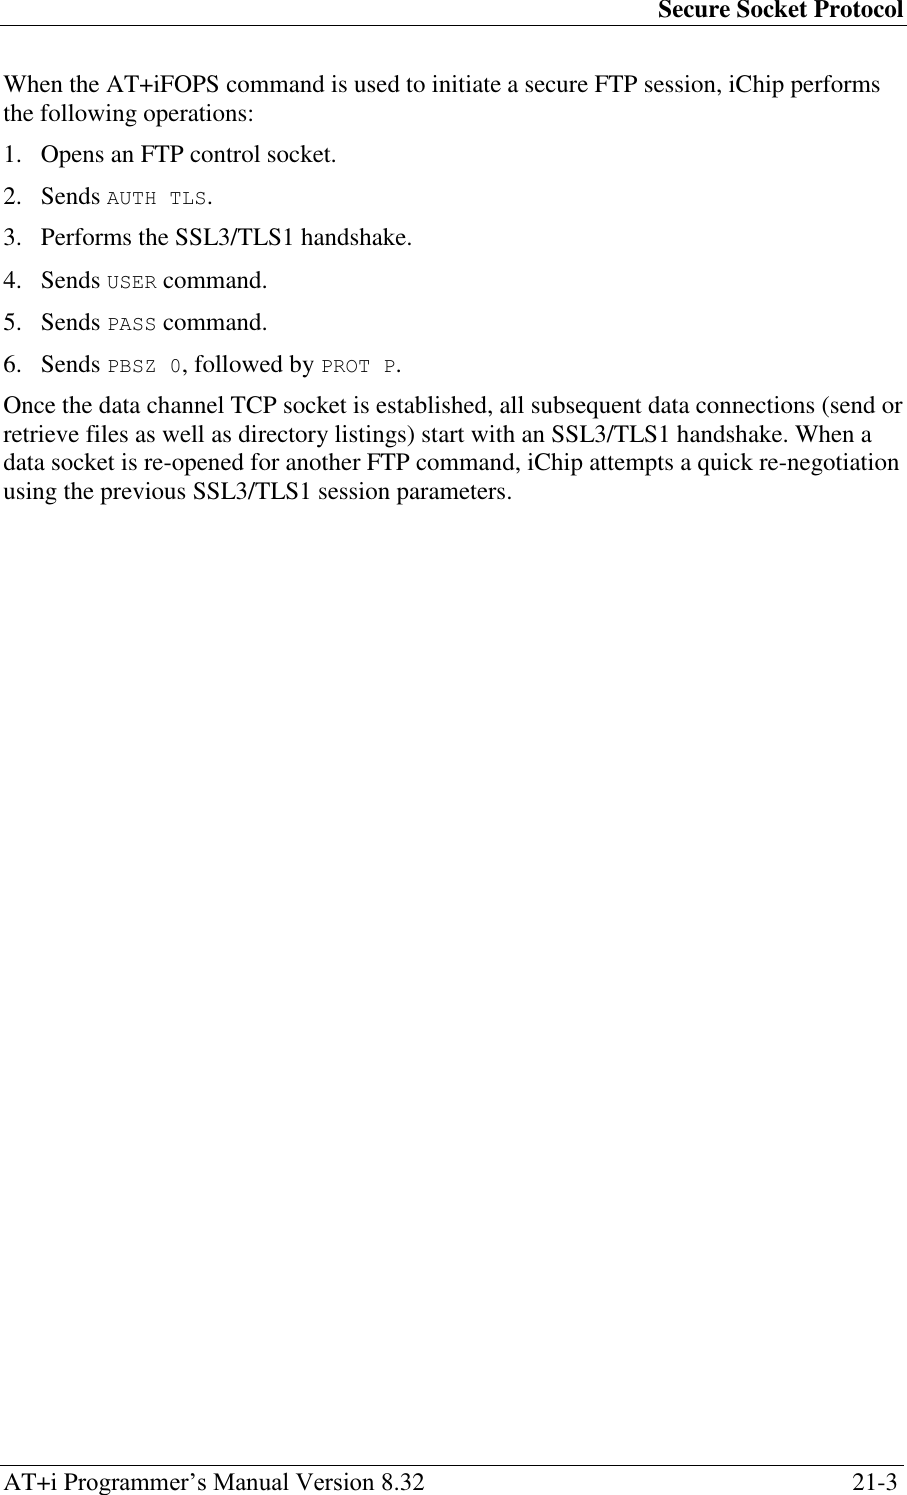 Secure Socket Protocol AT+i Programmer‘s Manual Version 8.32  21-3 When the AT+iFOPS command is used to initiate a secure FTP session, iChip performs the following operations: 1. Opens an FTP control socket. 2. Sends AUTH TLS. 3. Performs the SSL3/TLS1 handshake. 4. Sends USER command. 5. Sends PASS command. 6. Sends PBSZ 0, followed by PROT P. Once the data channel TCP socket is established, all subsequent data connections (send or retrieve files as well as directory listings) start with an SSL3/TLS1 handshake. When a data socket is re-opened for another FTP command, iChip attempts a quick re-negotiation using the previous SSL3/TLS1 session parameters. 